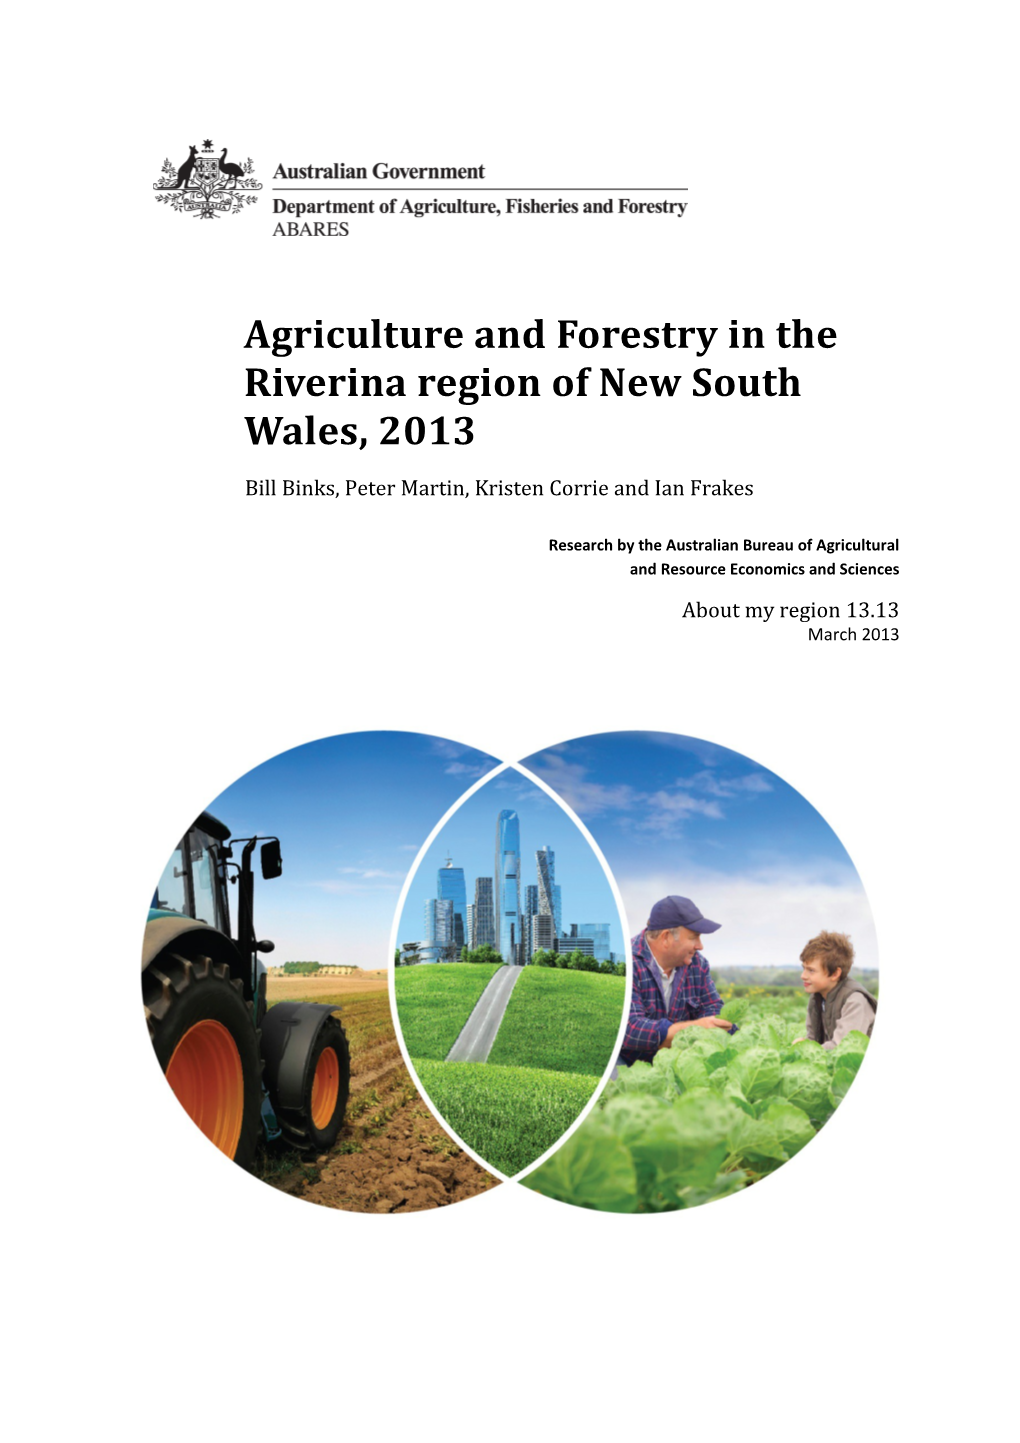 Agriculture and Forestry in the Riverina Region of New South Wales, 2013